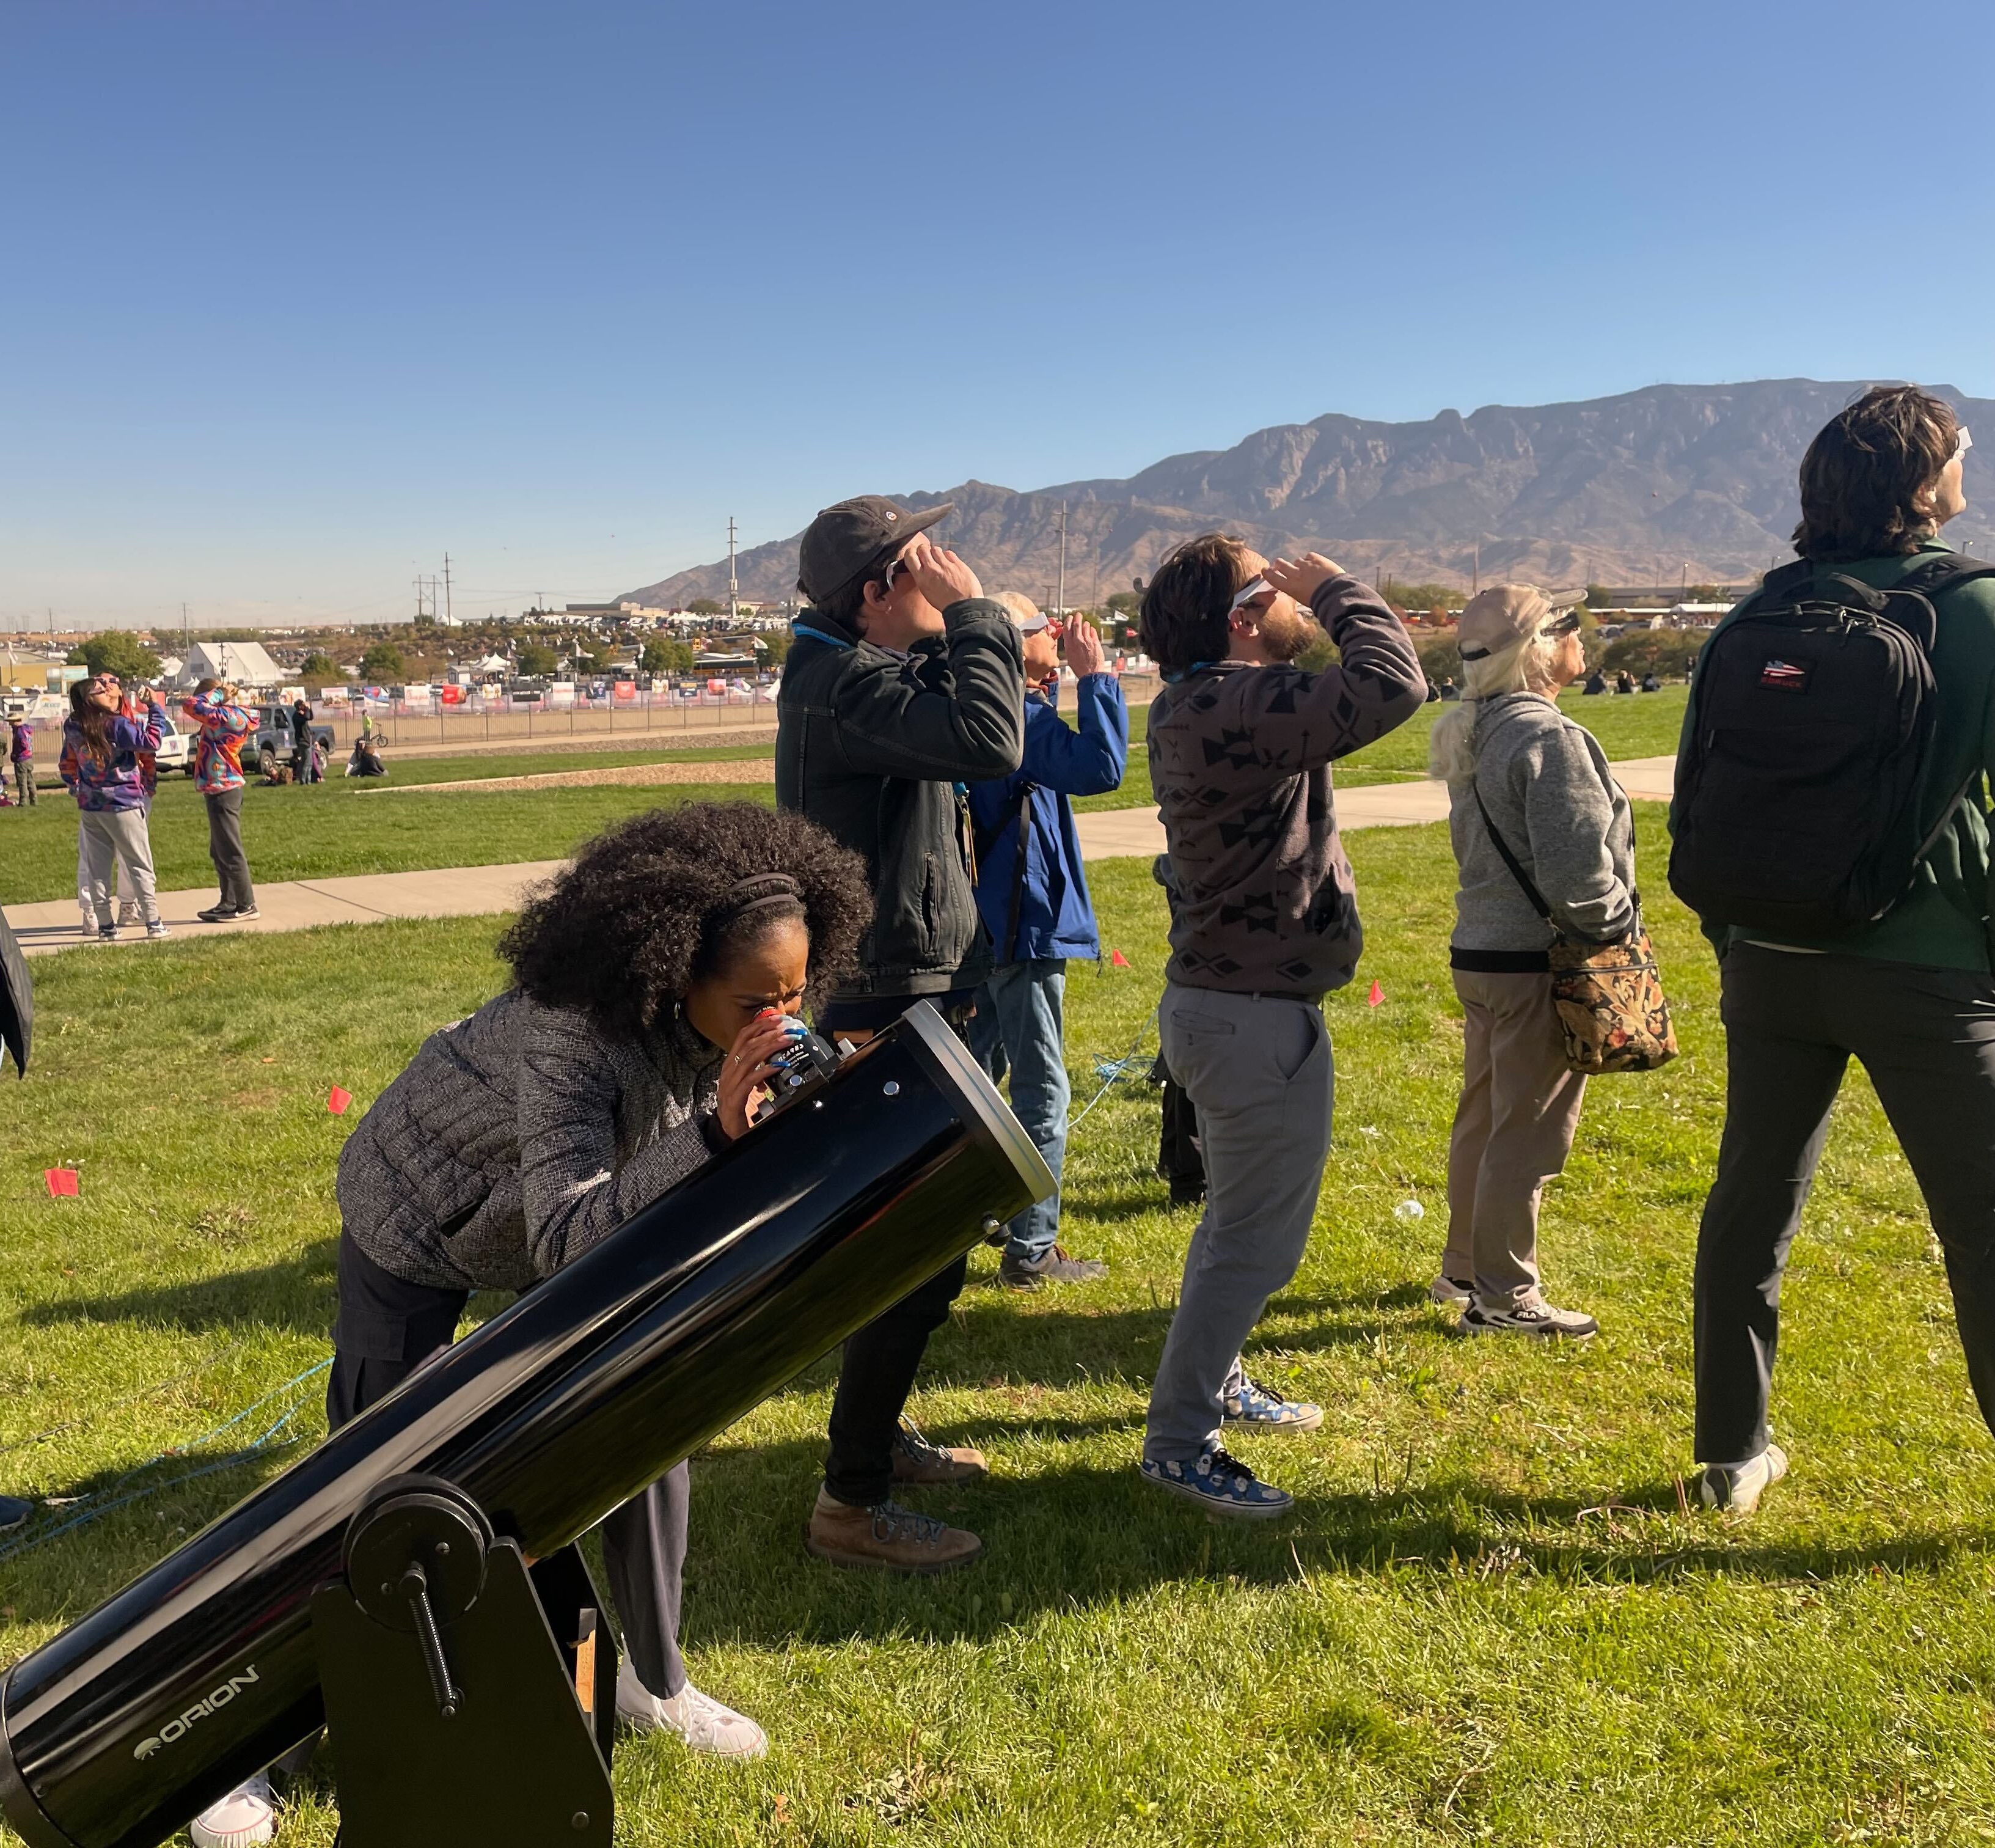 Against a landscape of a flat field and mountains, several people look toward the sky while wearing eclipse glasses. One woman looks through a telecope.